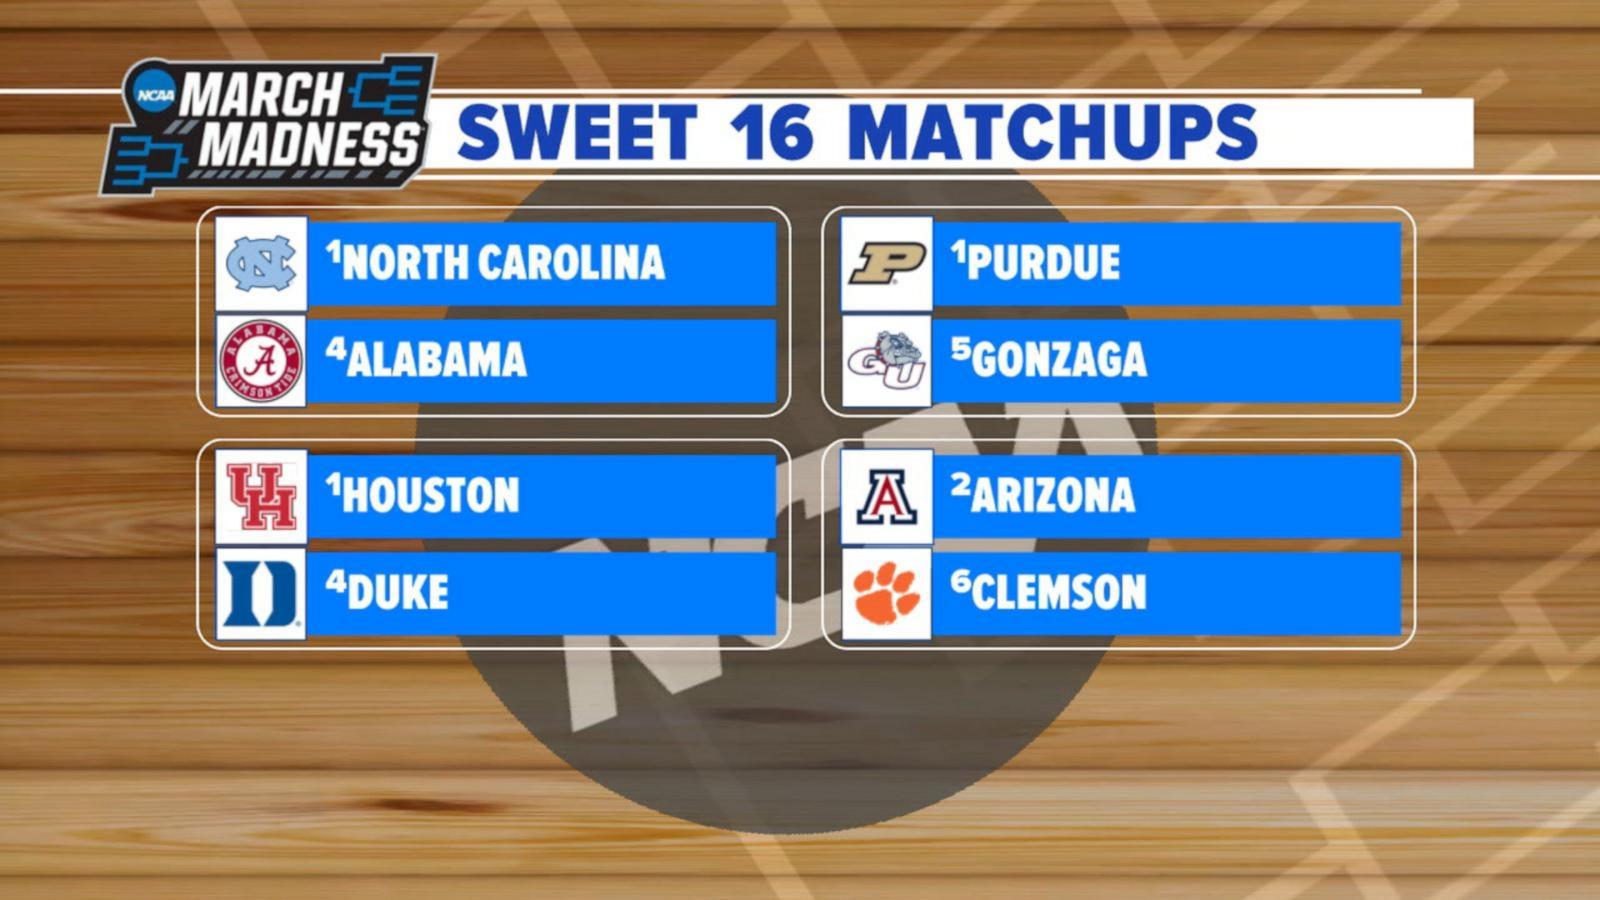 VIDEO: What to know ahead of NCAA Men’s Sweet 16